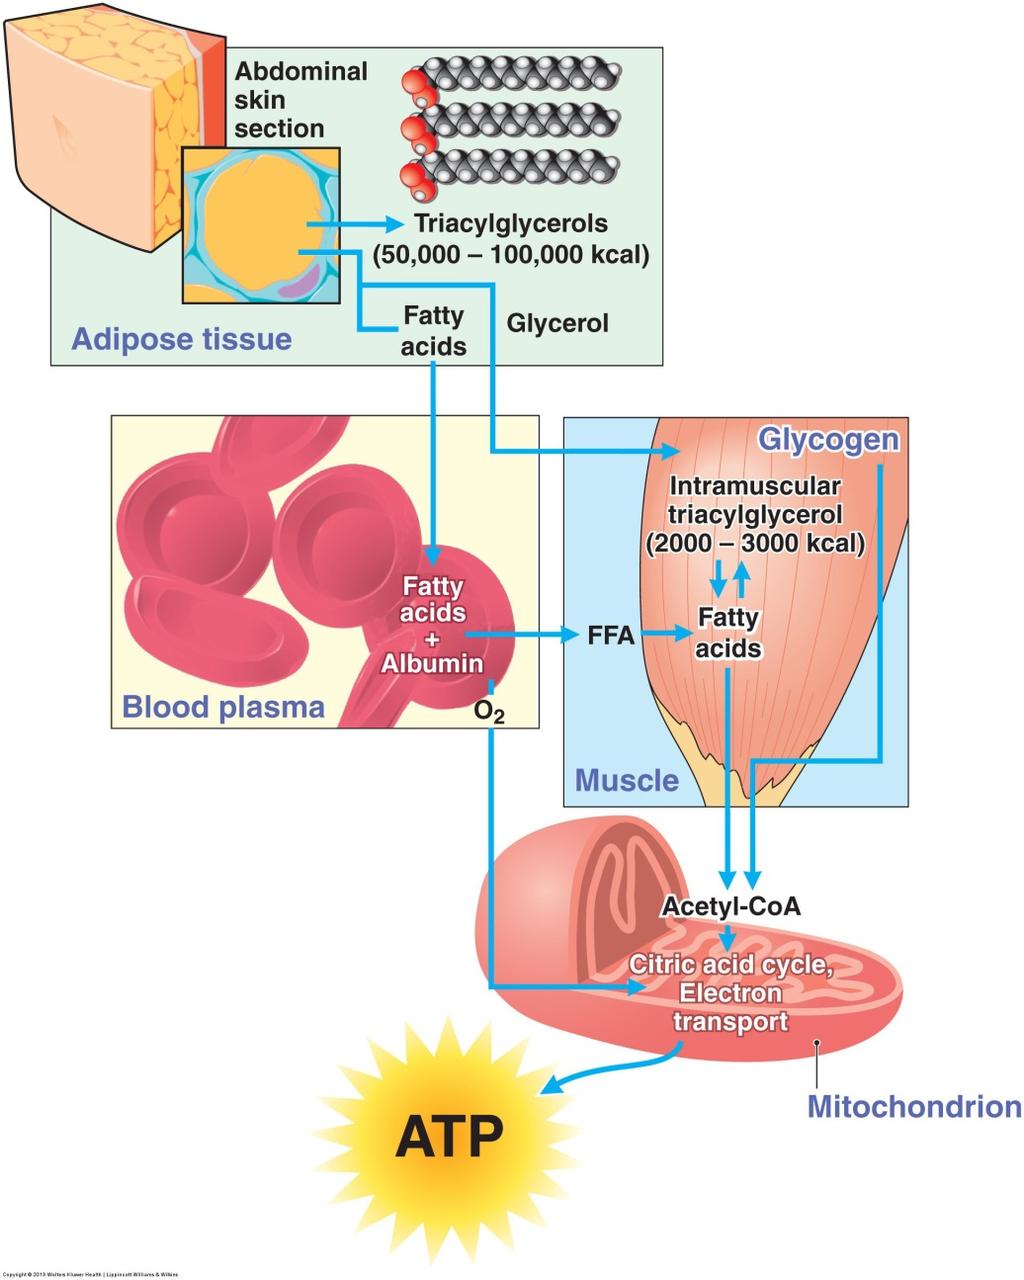 6. Energy Release from Macronutrients Adipocytes TAG fat droplets take up to 95% of adipocyte volume & is major FFA source Lipase stimulates glycerol & FFA release from adipocytes FFA bind to albumin